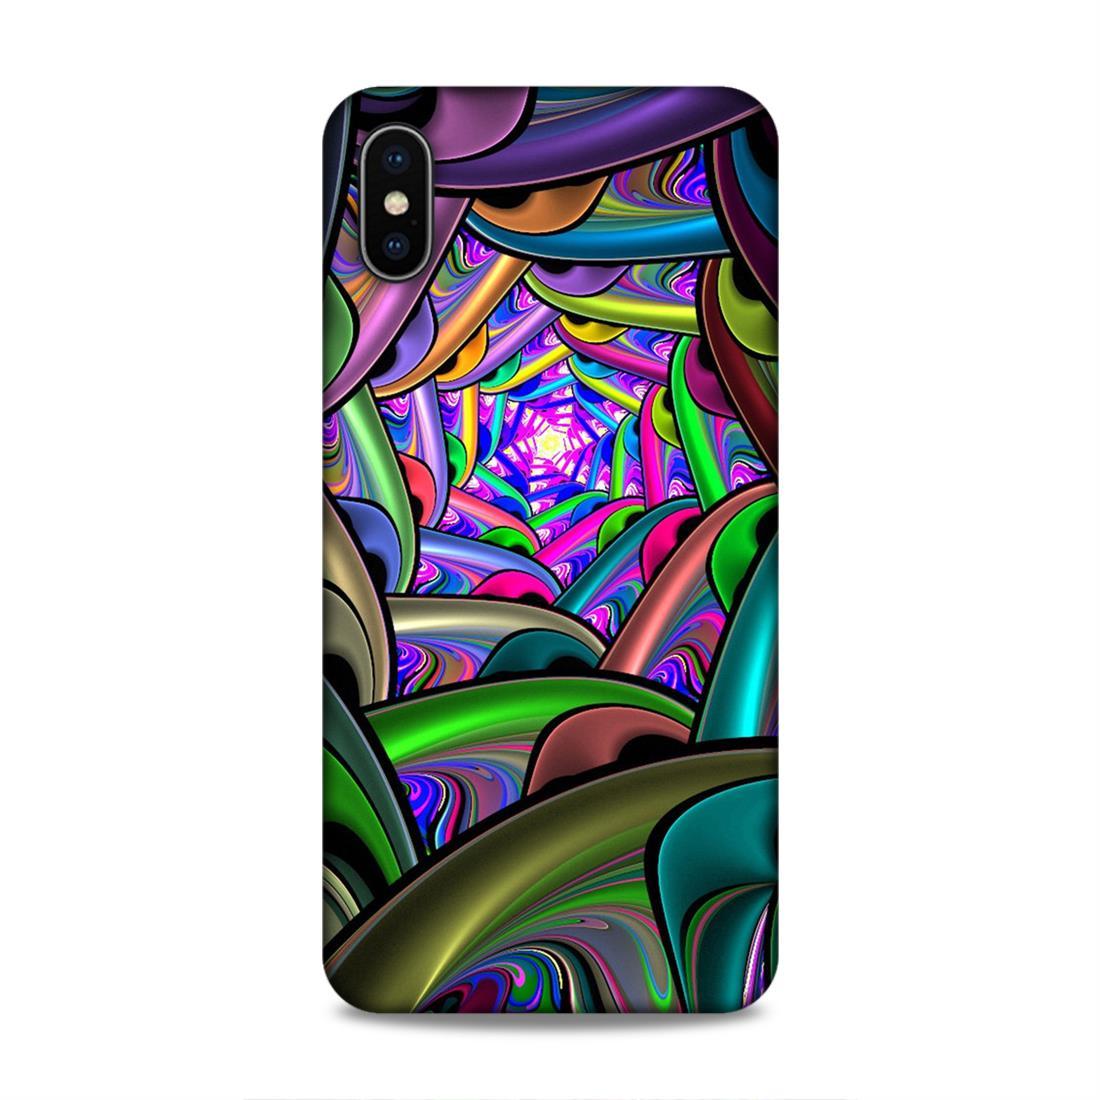 Deep Multicolour iPhone XS Max Mobile Cover